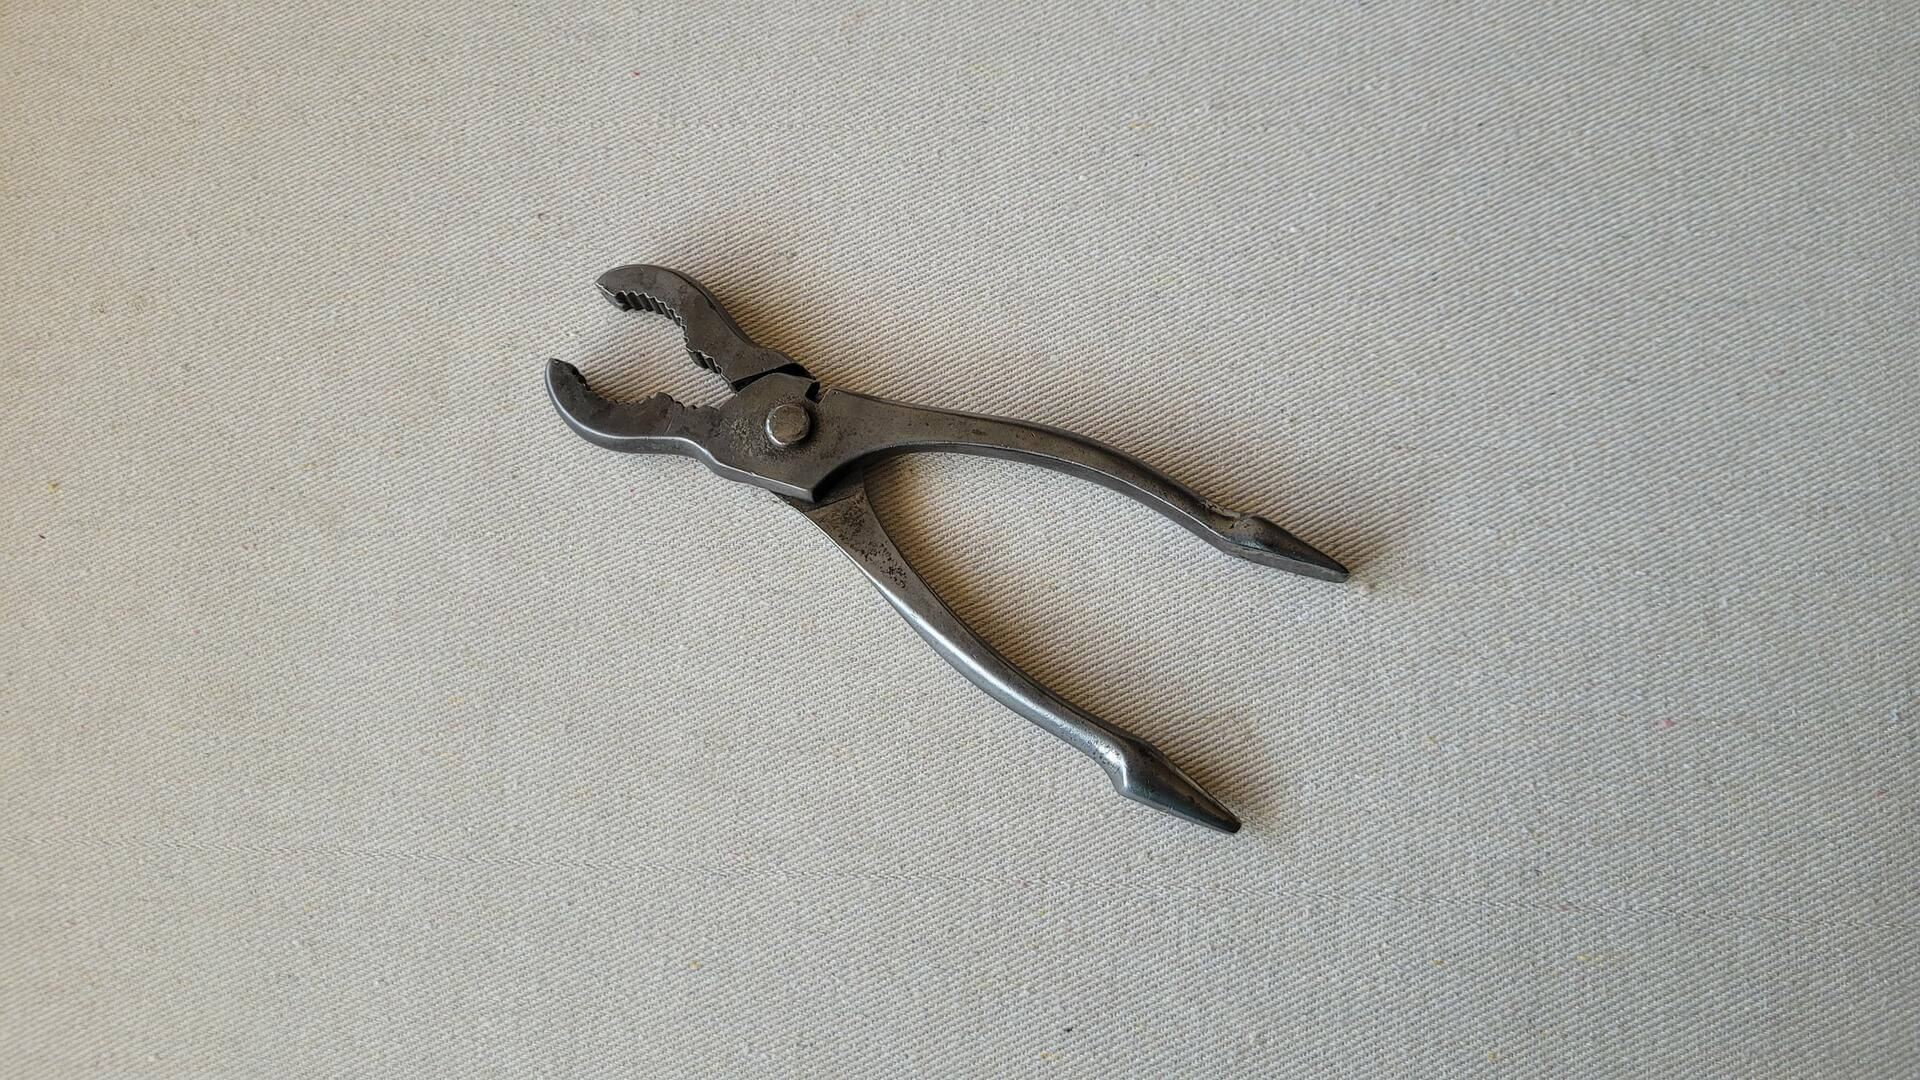 Antique gas and burner pliers w 2 curved jaws for pipework, pipe reamer & screw handles. Vintage made in USA collectible plumbing & gas fitter hand tools